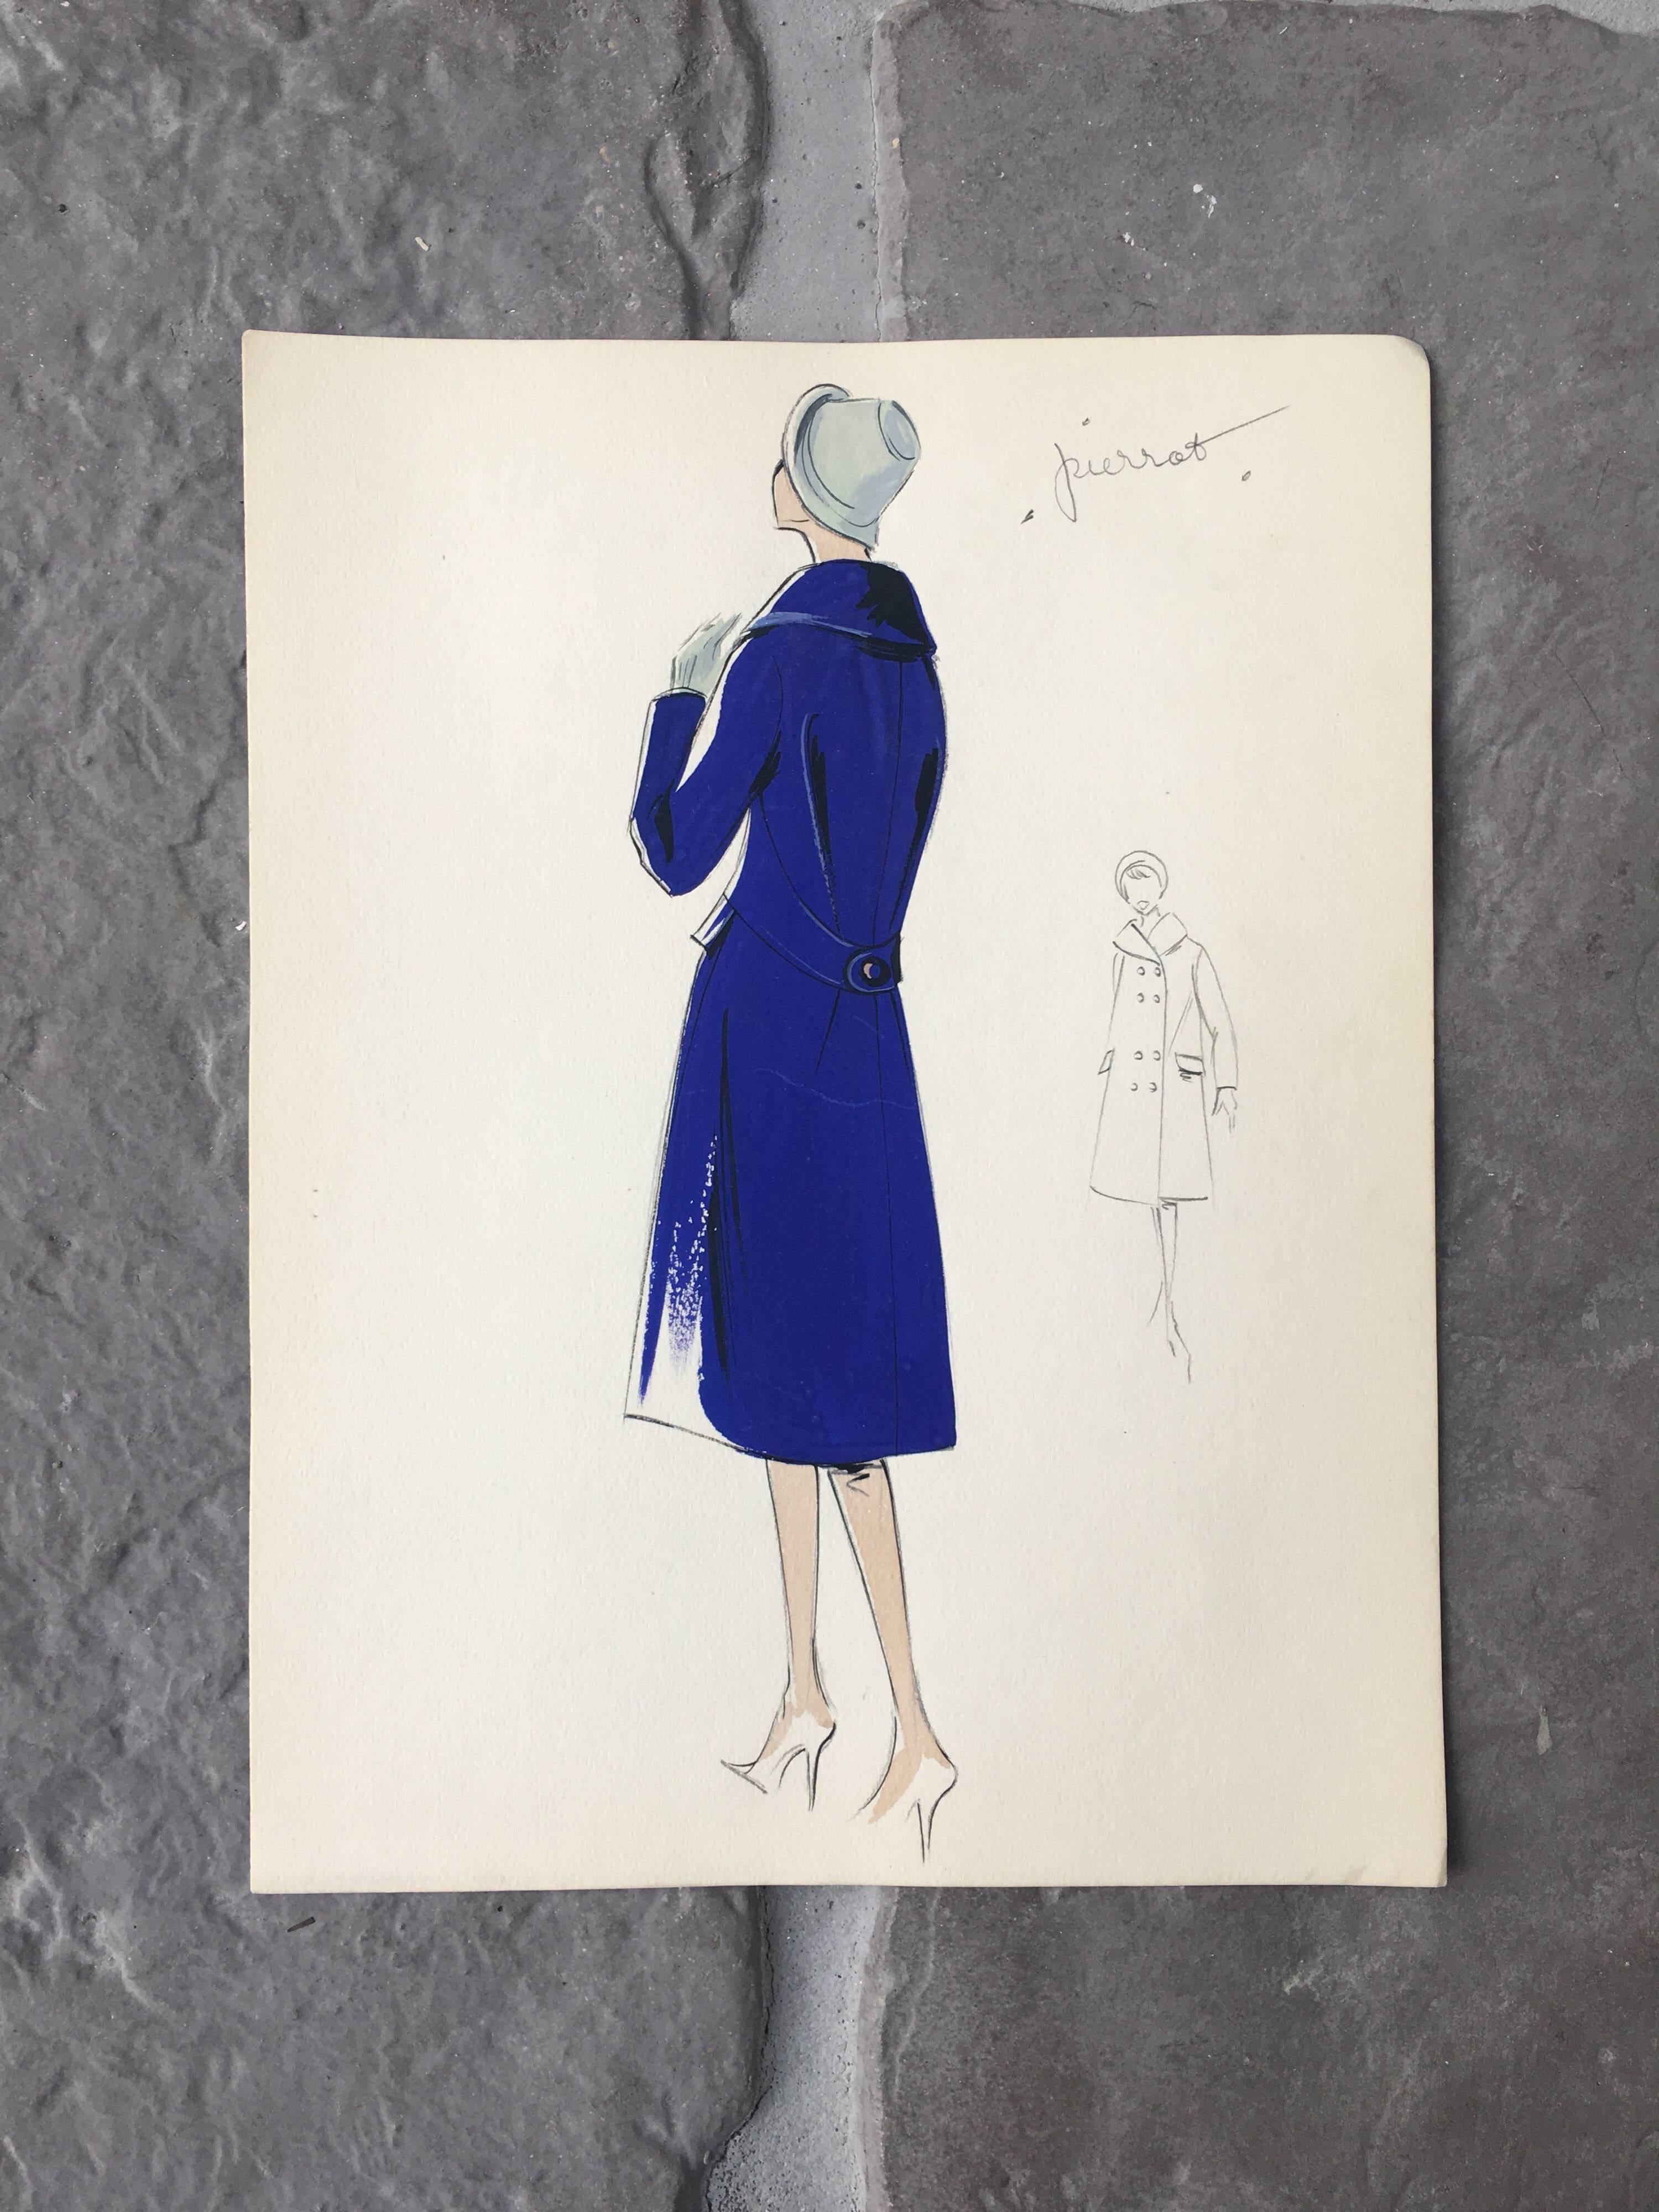 Lady in Elegant 1950's Winter Coat Parisian Fashion Illustration Sketch - Painting by Unknown